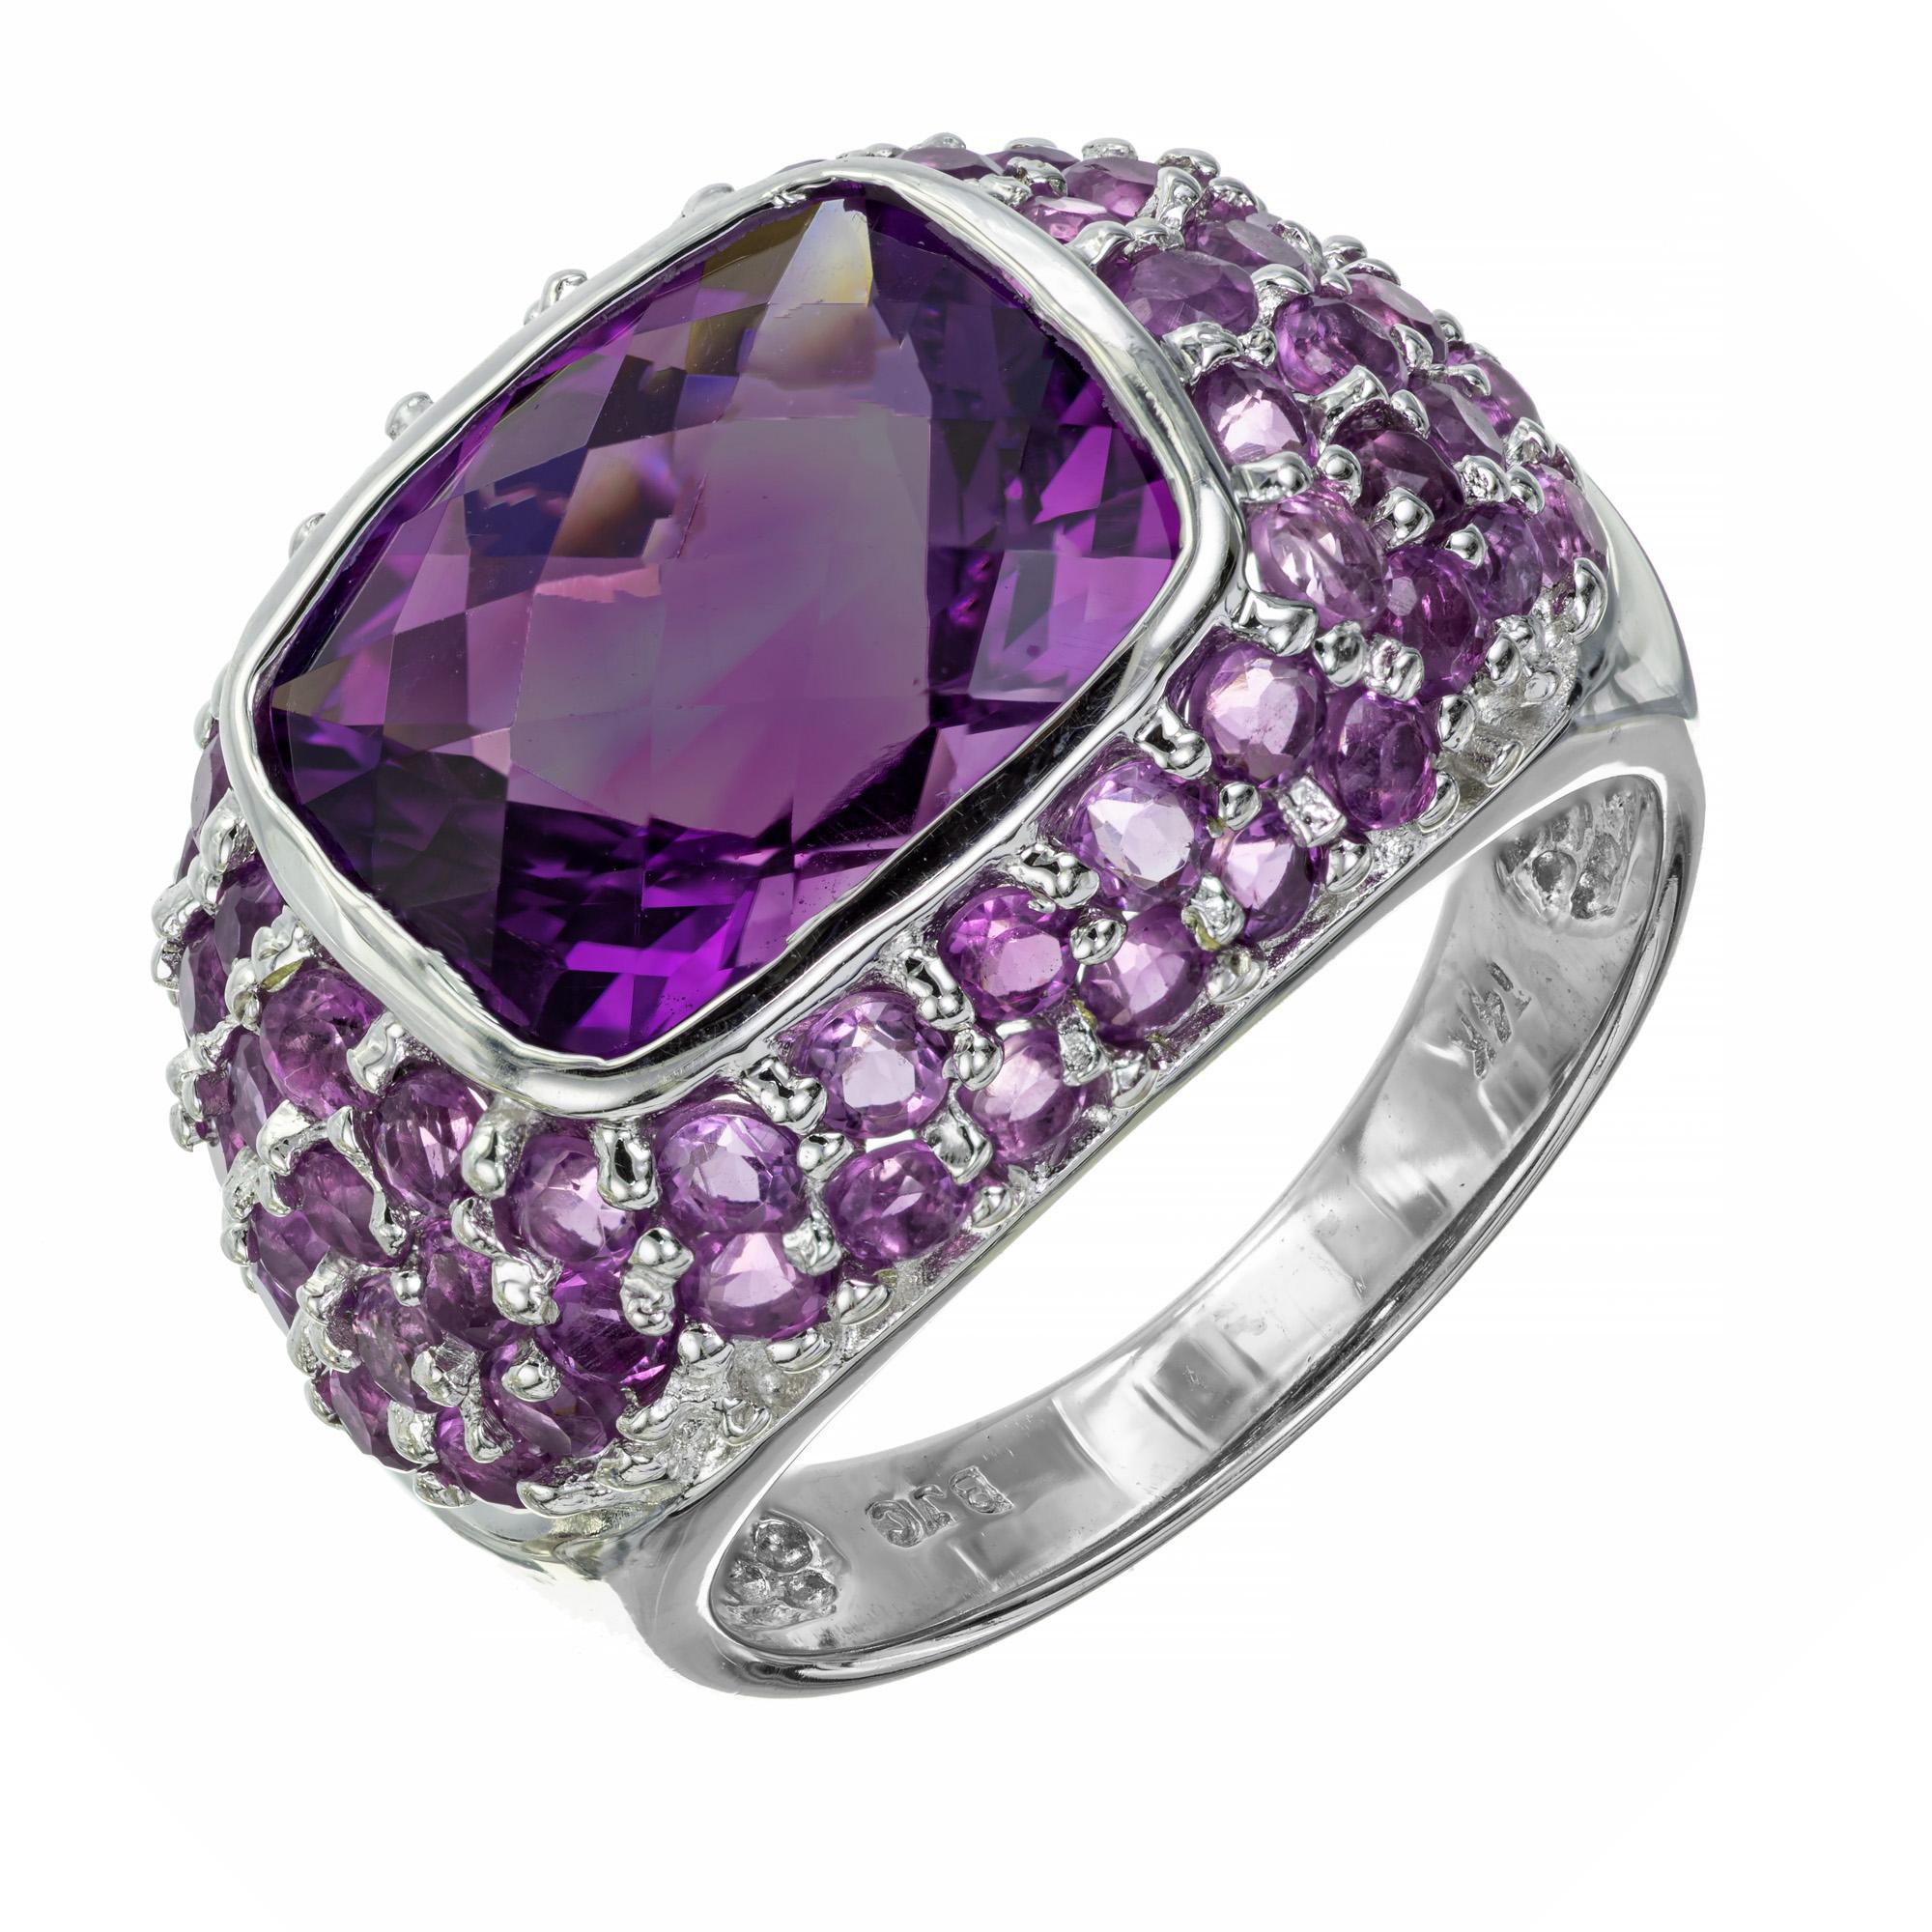 4.00cts center cushion cut bezel set amethyst ring. Set in a 14k white gold setting with 62 round amethyst accent stones in a cluster, cocktail ring setting.  

1 cushion cut Amethyst 10.5 x 9mm, approx. total weight 4.0cts
62 round Amethyst approx.